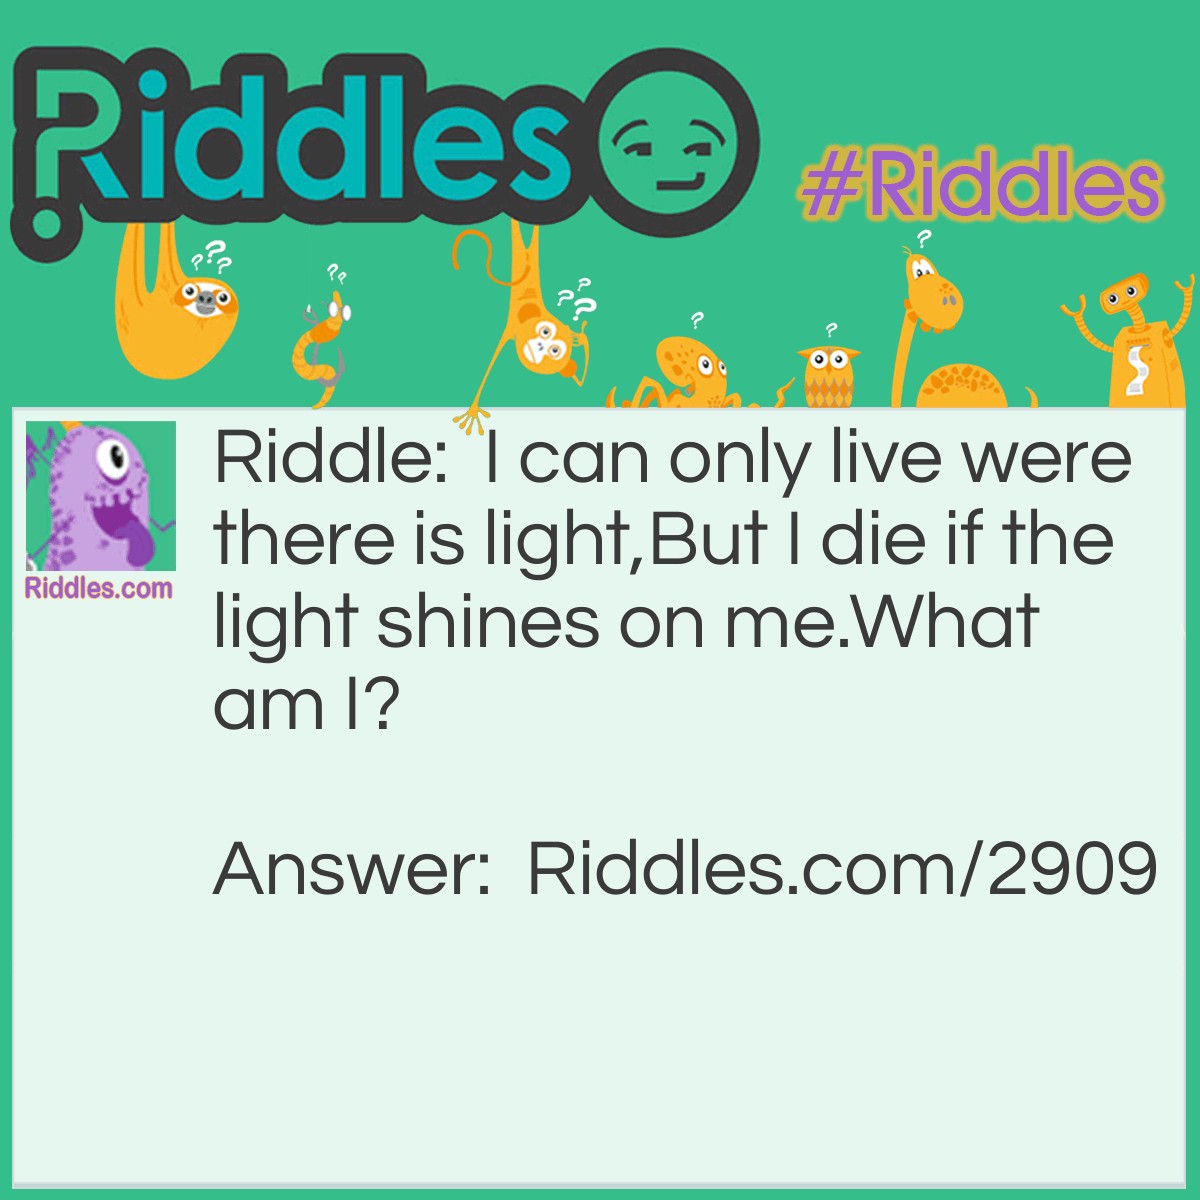 Riddle: I can only live were there is light, But I die if the light shines on me. What am I? Answer: A shadow.